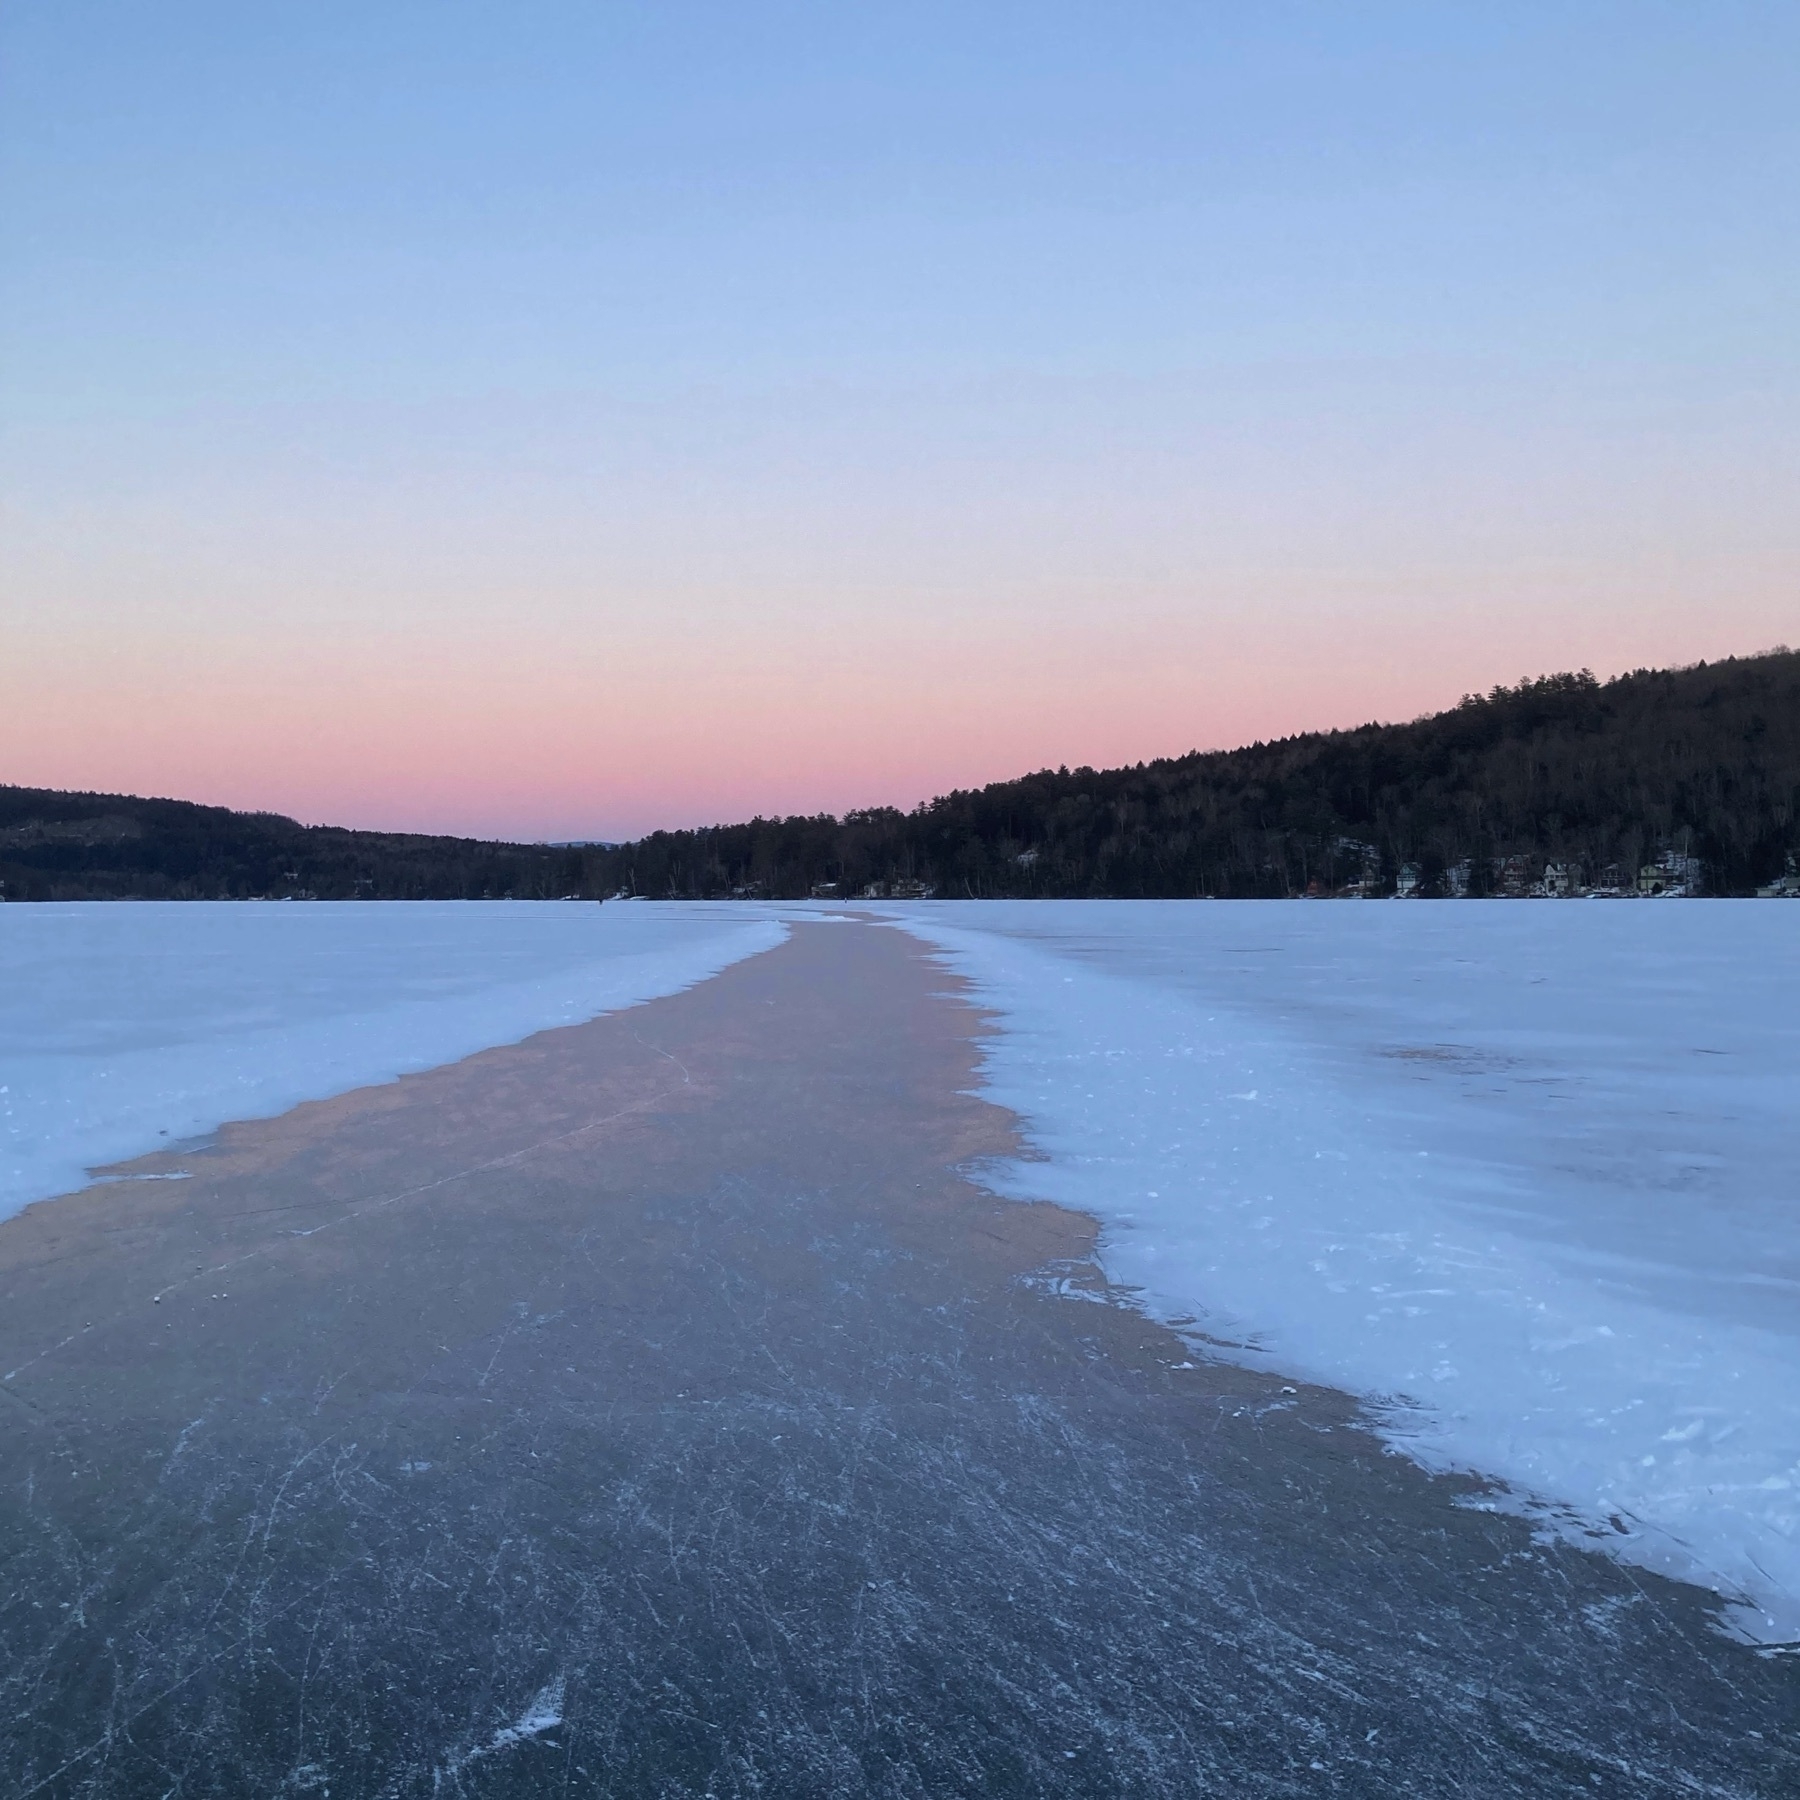 Frozen lake with snow covering everything except a path of ice with ice skate scuff marks. Sunset behind hills in the distance.